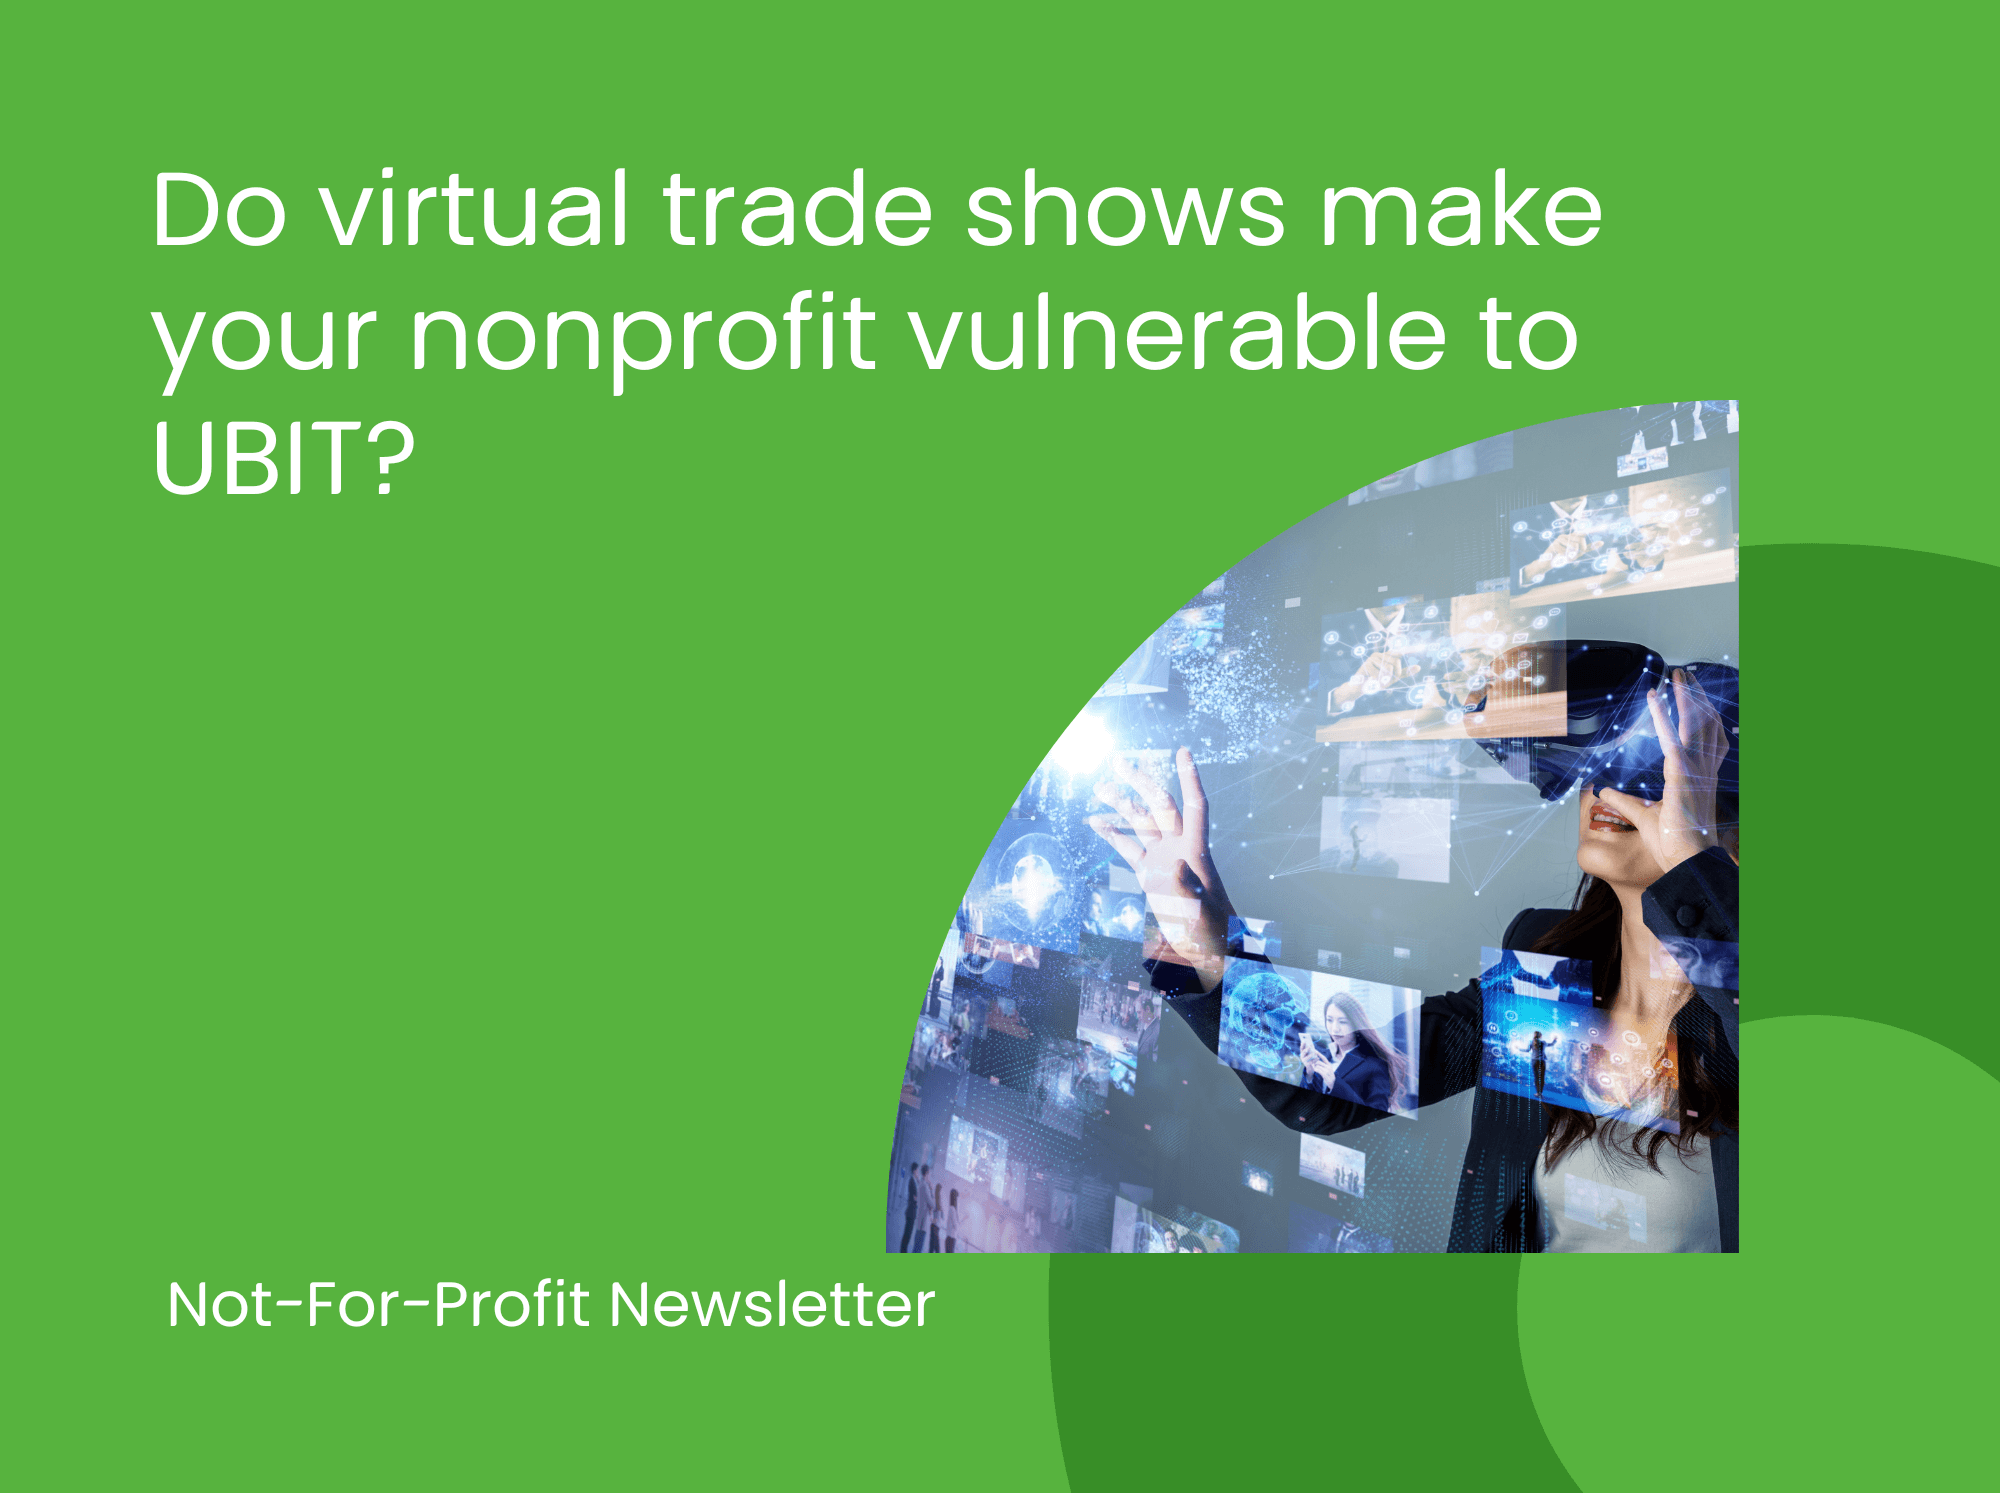 Do virtual trade shows make your nonprofit vulnerable to UBIT?